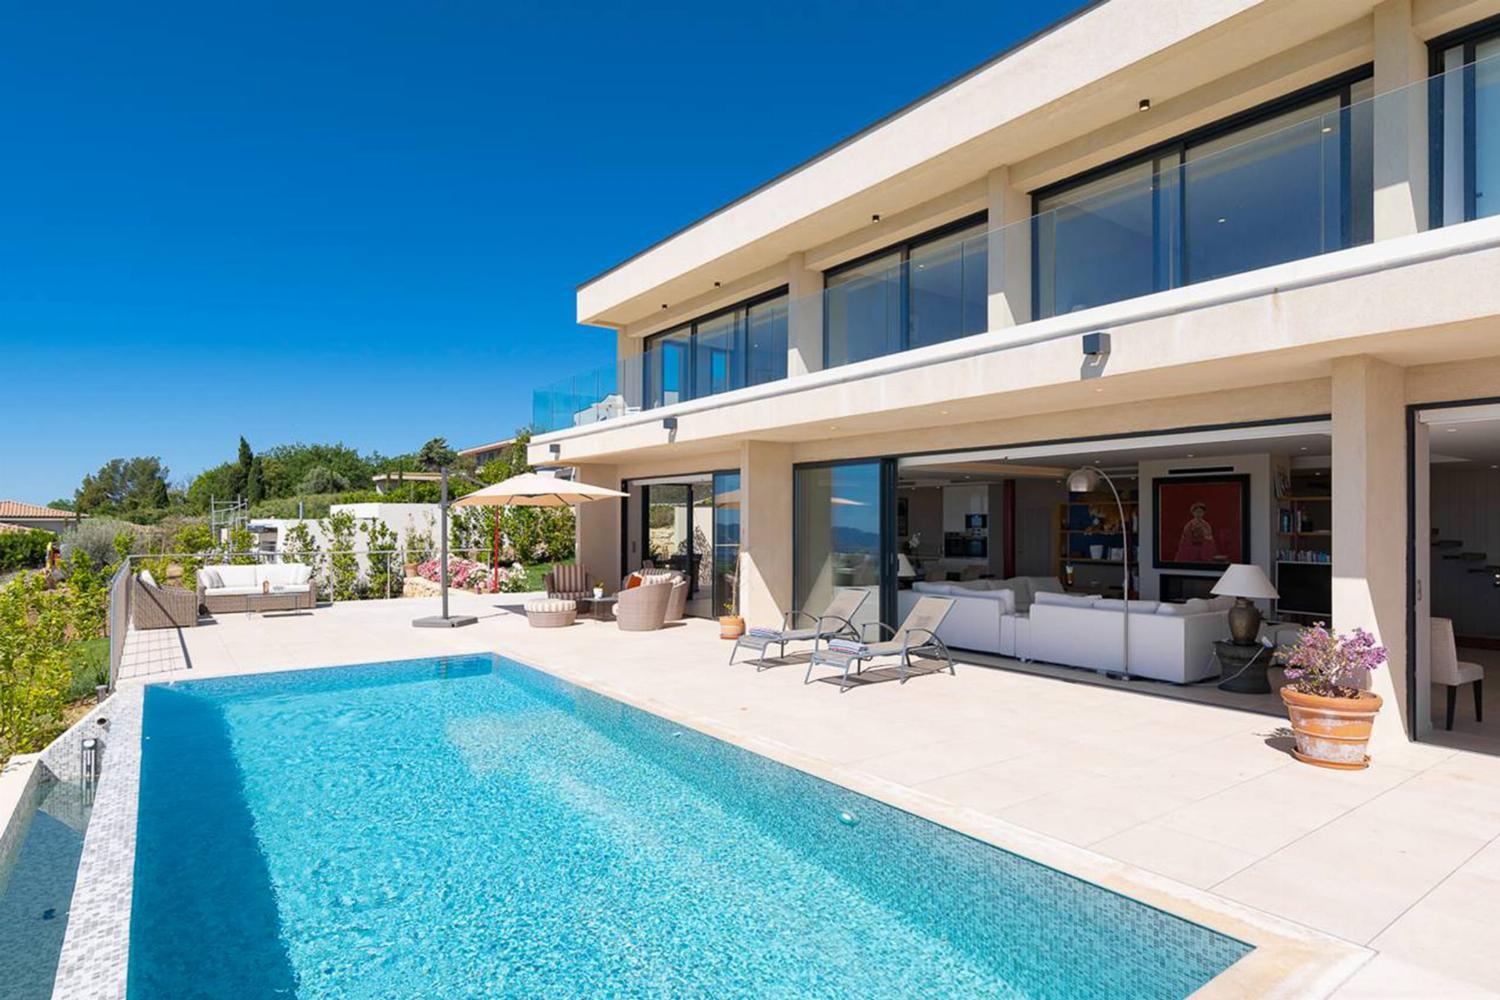 Holiday villa in Provence with private infinity pool